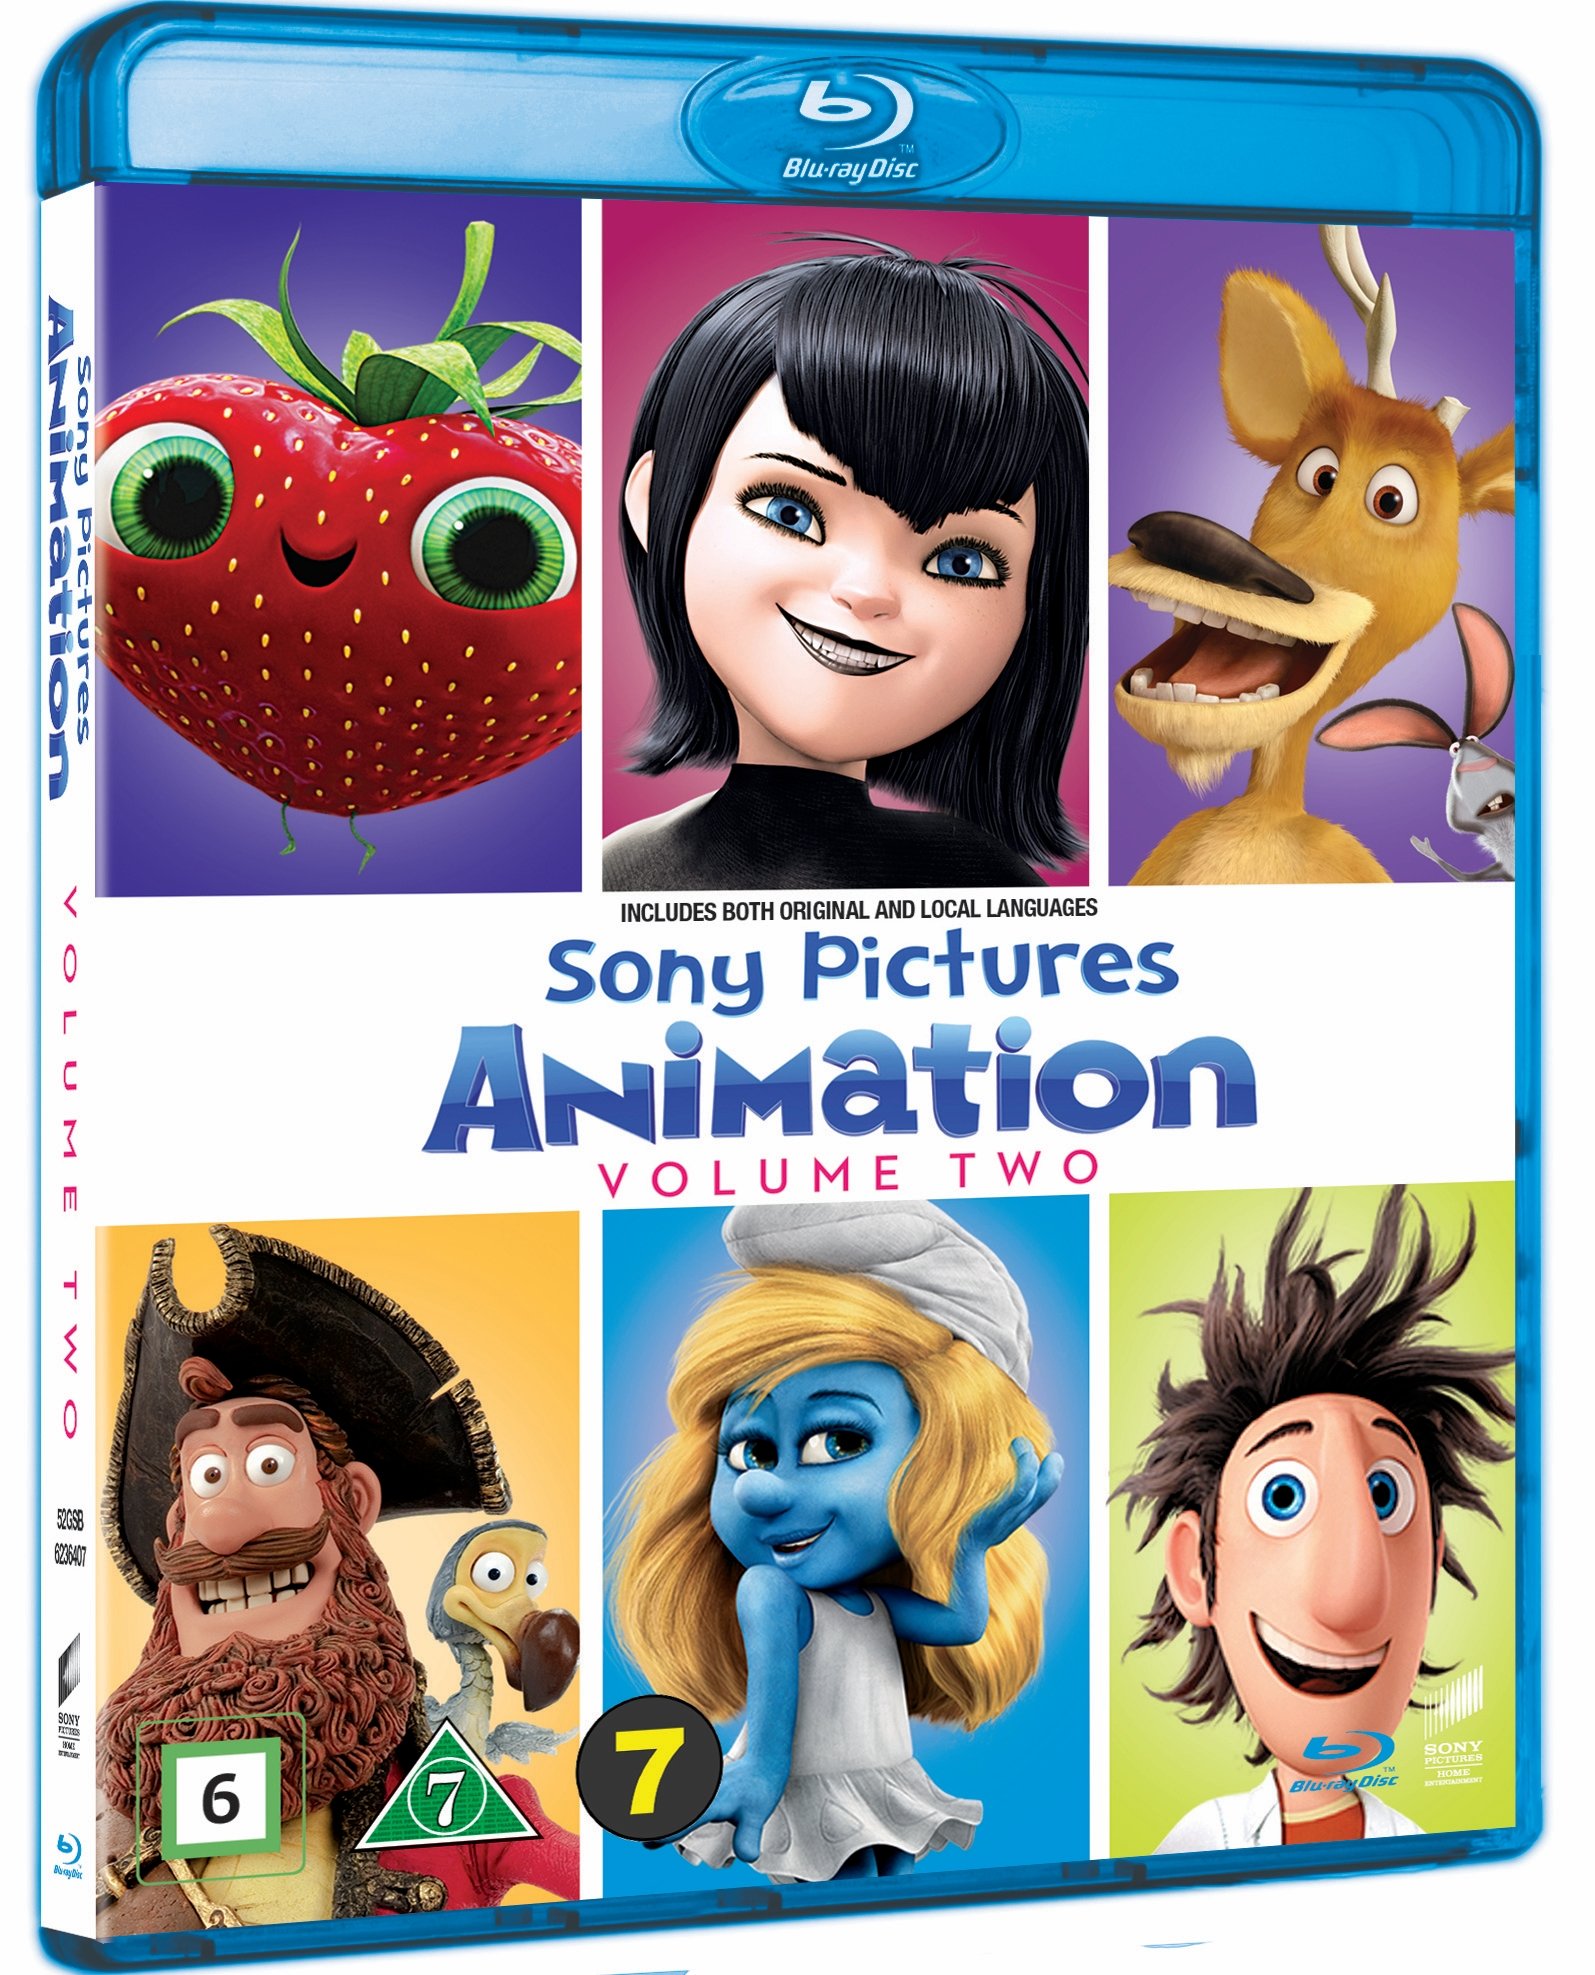 Kaupa Sony Pictures Animation Vol 2 Blu Ray